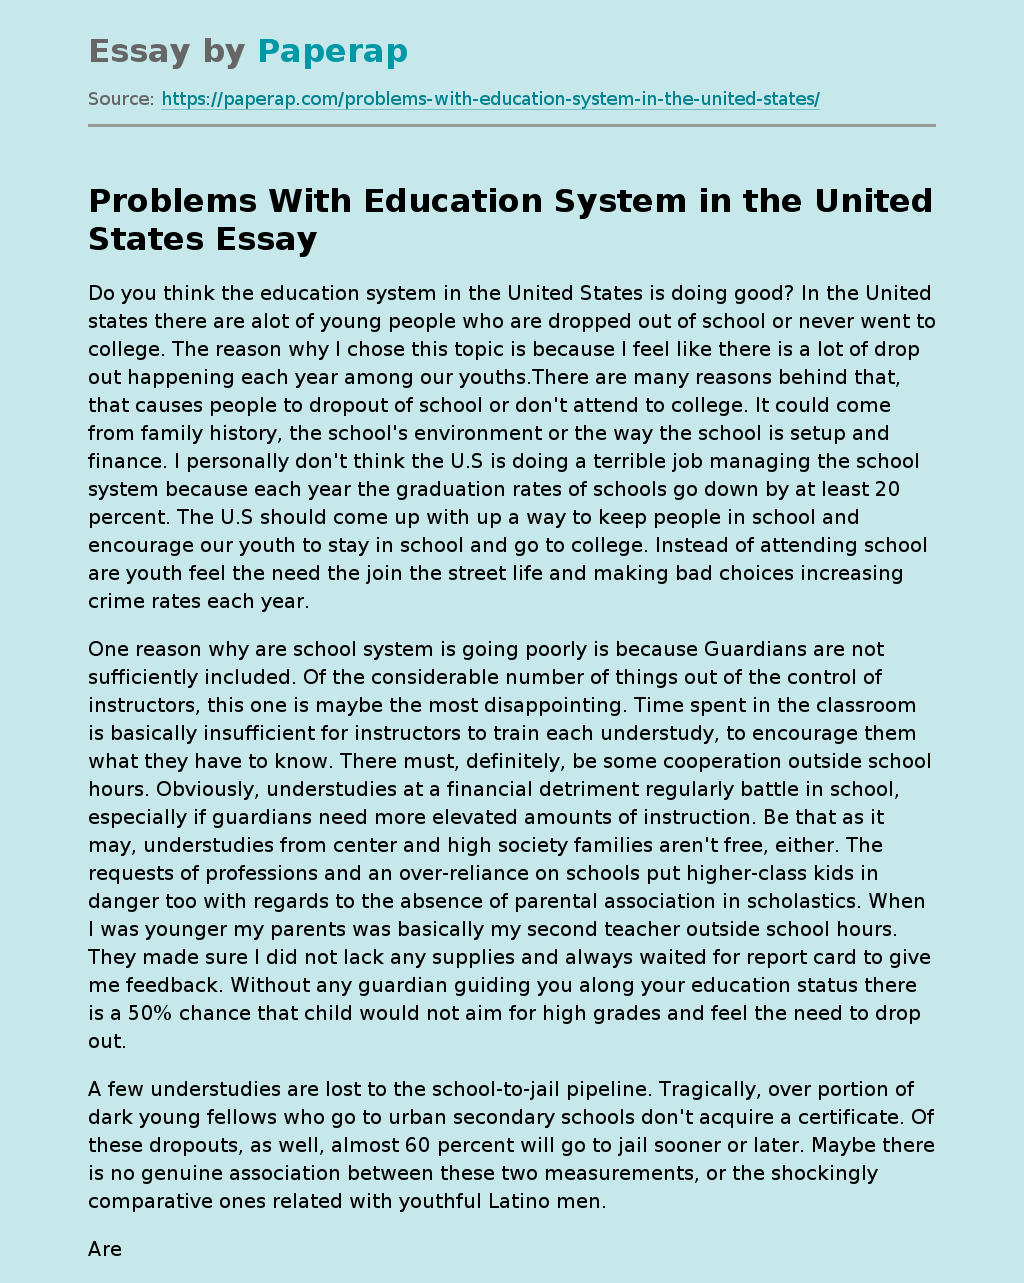 Problems With Education System in the United States